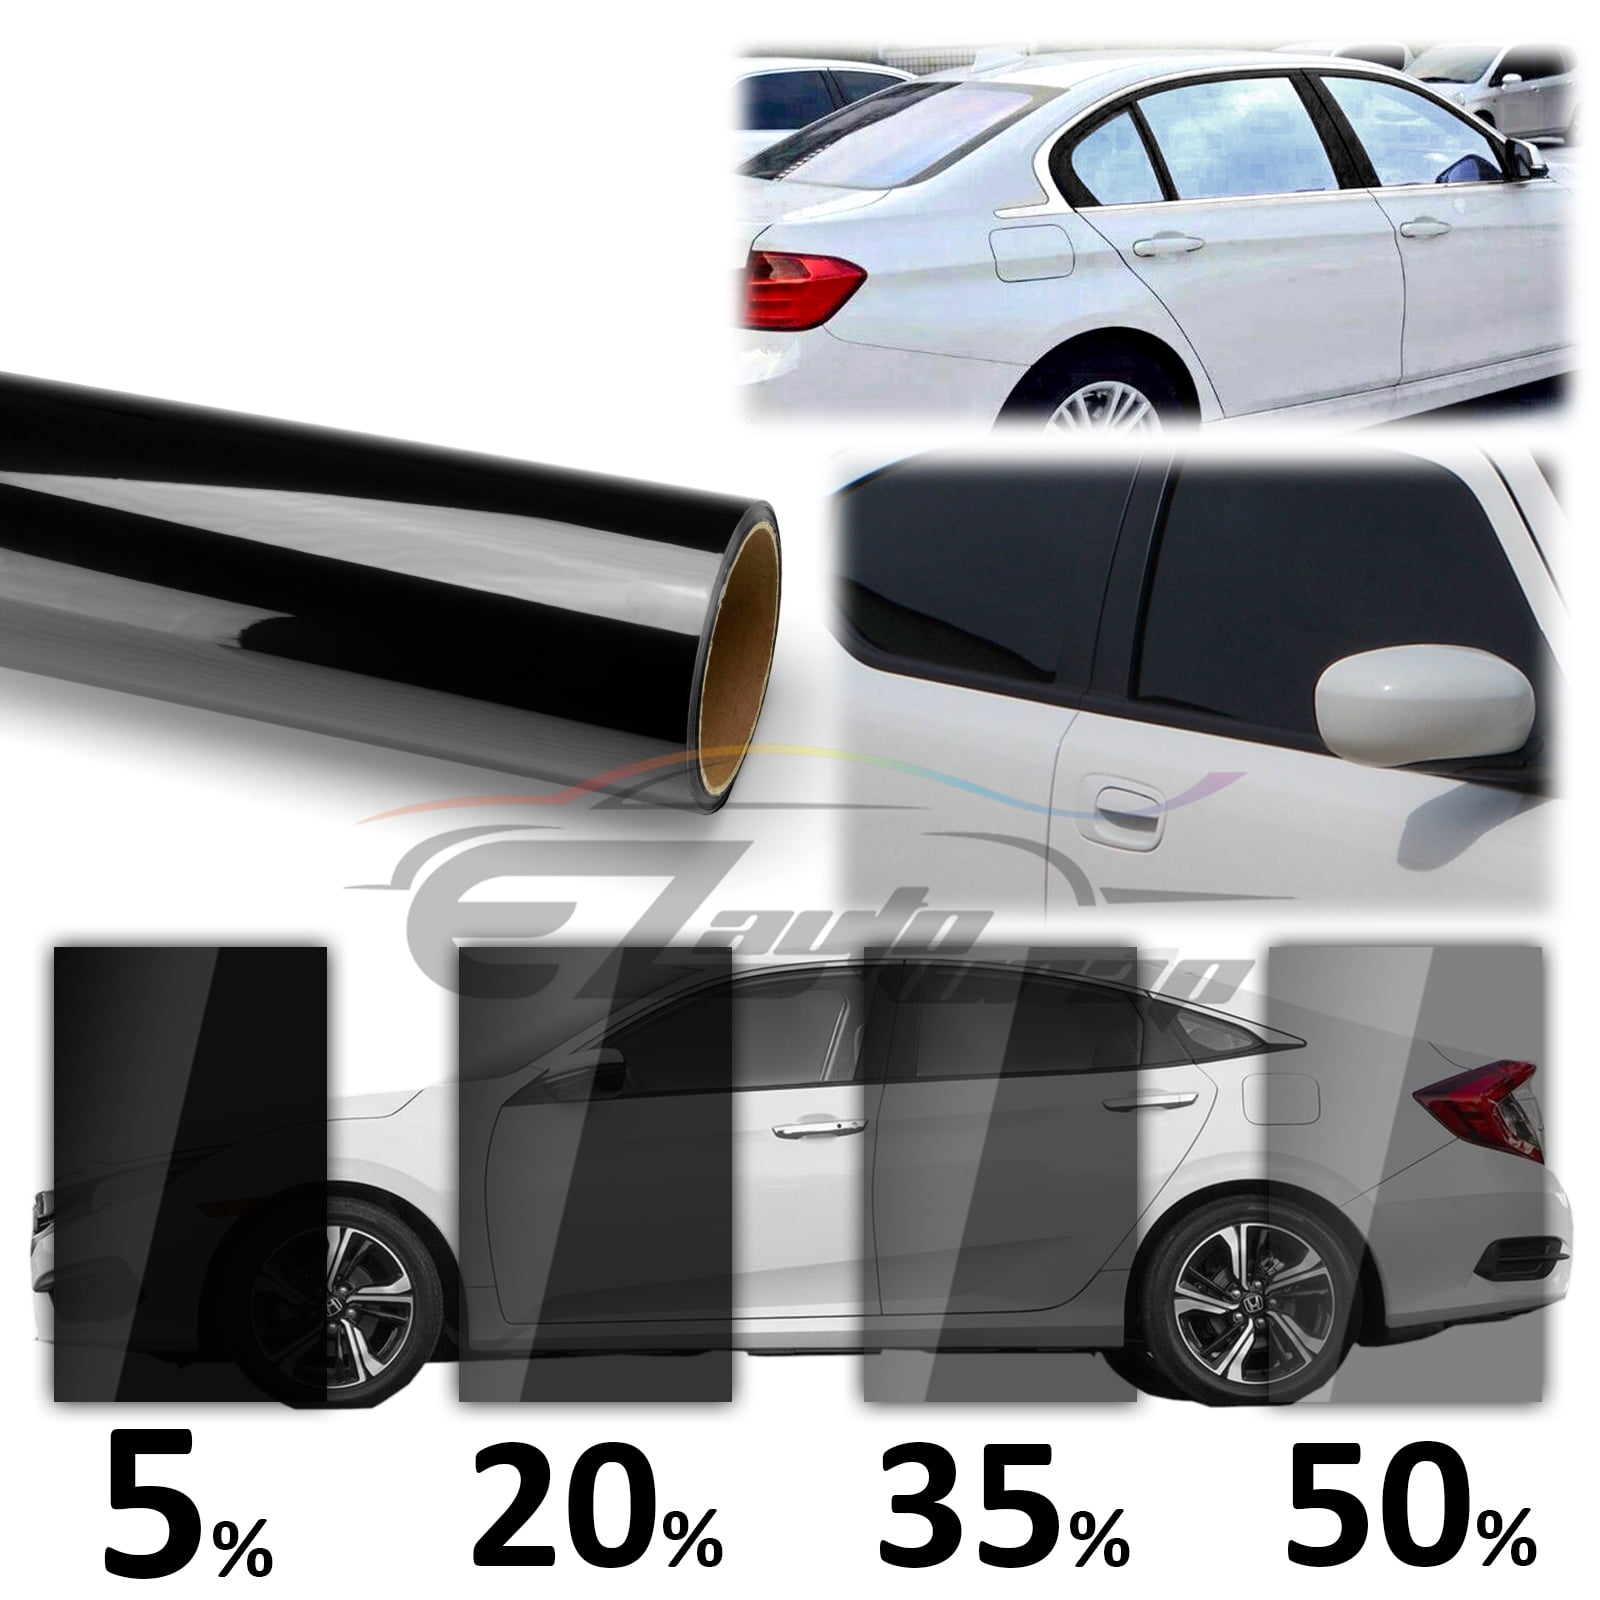 SUPER LIMO 3 % GREEN fader film reflective to green tint 20" by 100 ft roll 